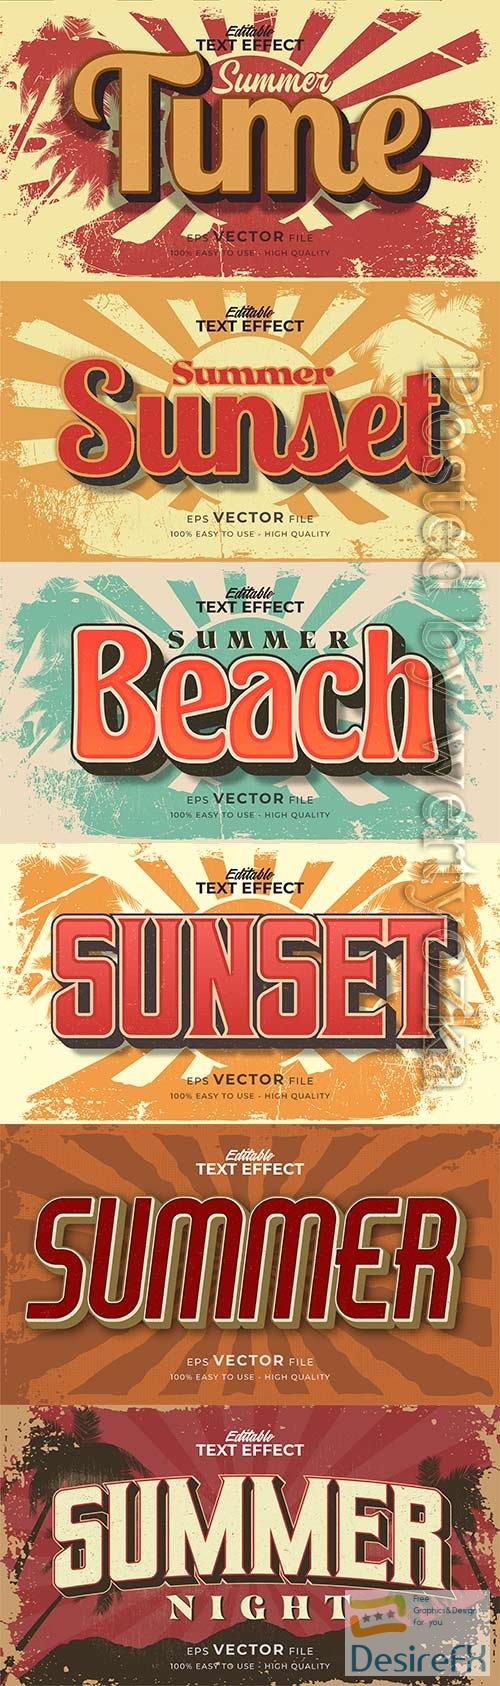 Retro summer holiday text in grunge style theme in vector vol 4